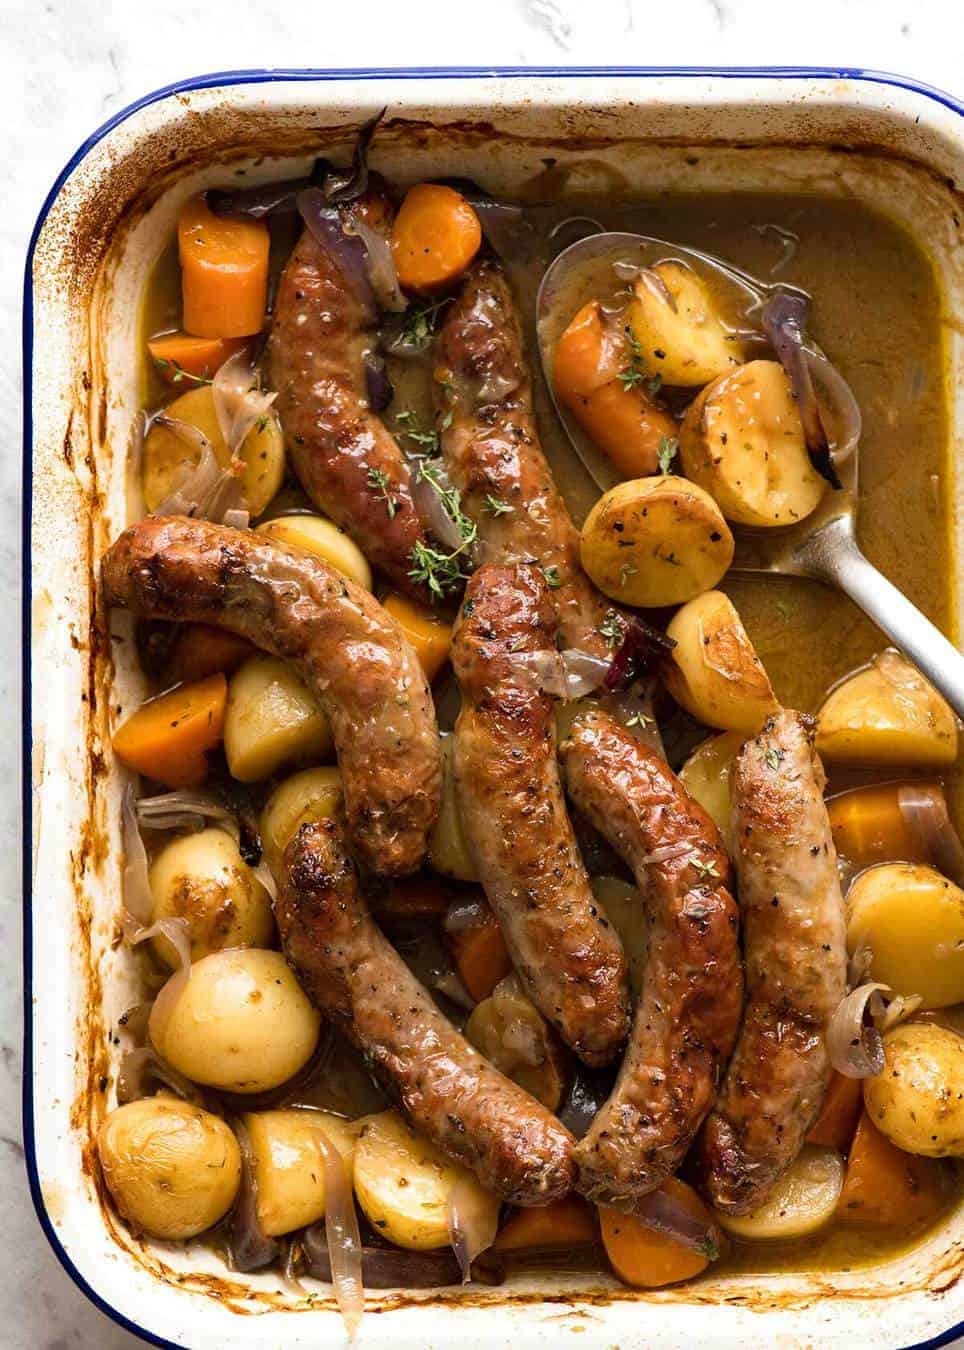 A Sausage Bake and Vegetables WITH Gravy, all made in one pan! Yes, that's right - even the GRAVY is made in the same pan while it's baking! recipetineats.com